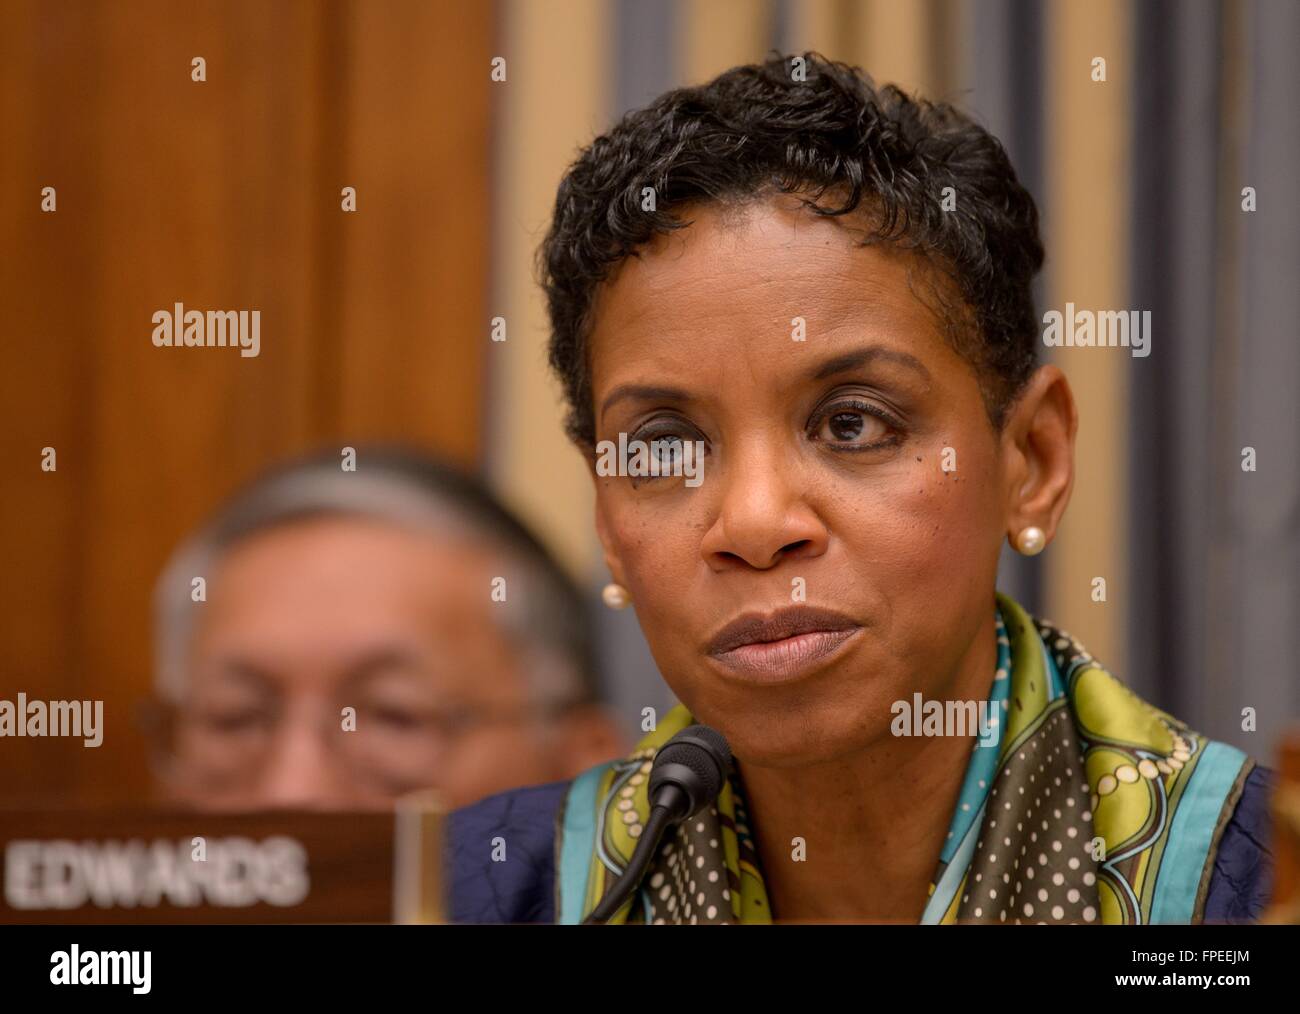 U.S Congresswoman Donna Edwards during the House Committee on Science, Space, and Technology hearing on the budget for the National Aeronautics and Space Administration at the Rayburn House Office Building on Capitol Hill March 17, 2016 in Washington, DC. Stock Photo